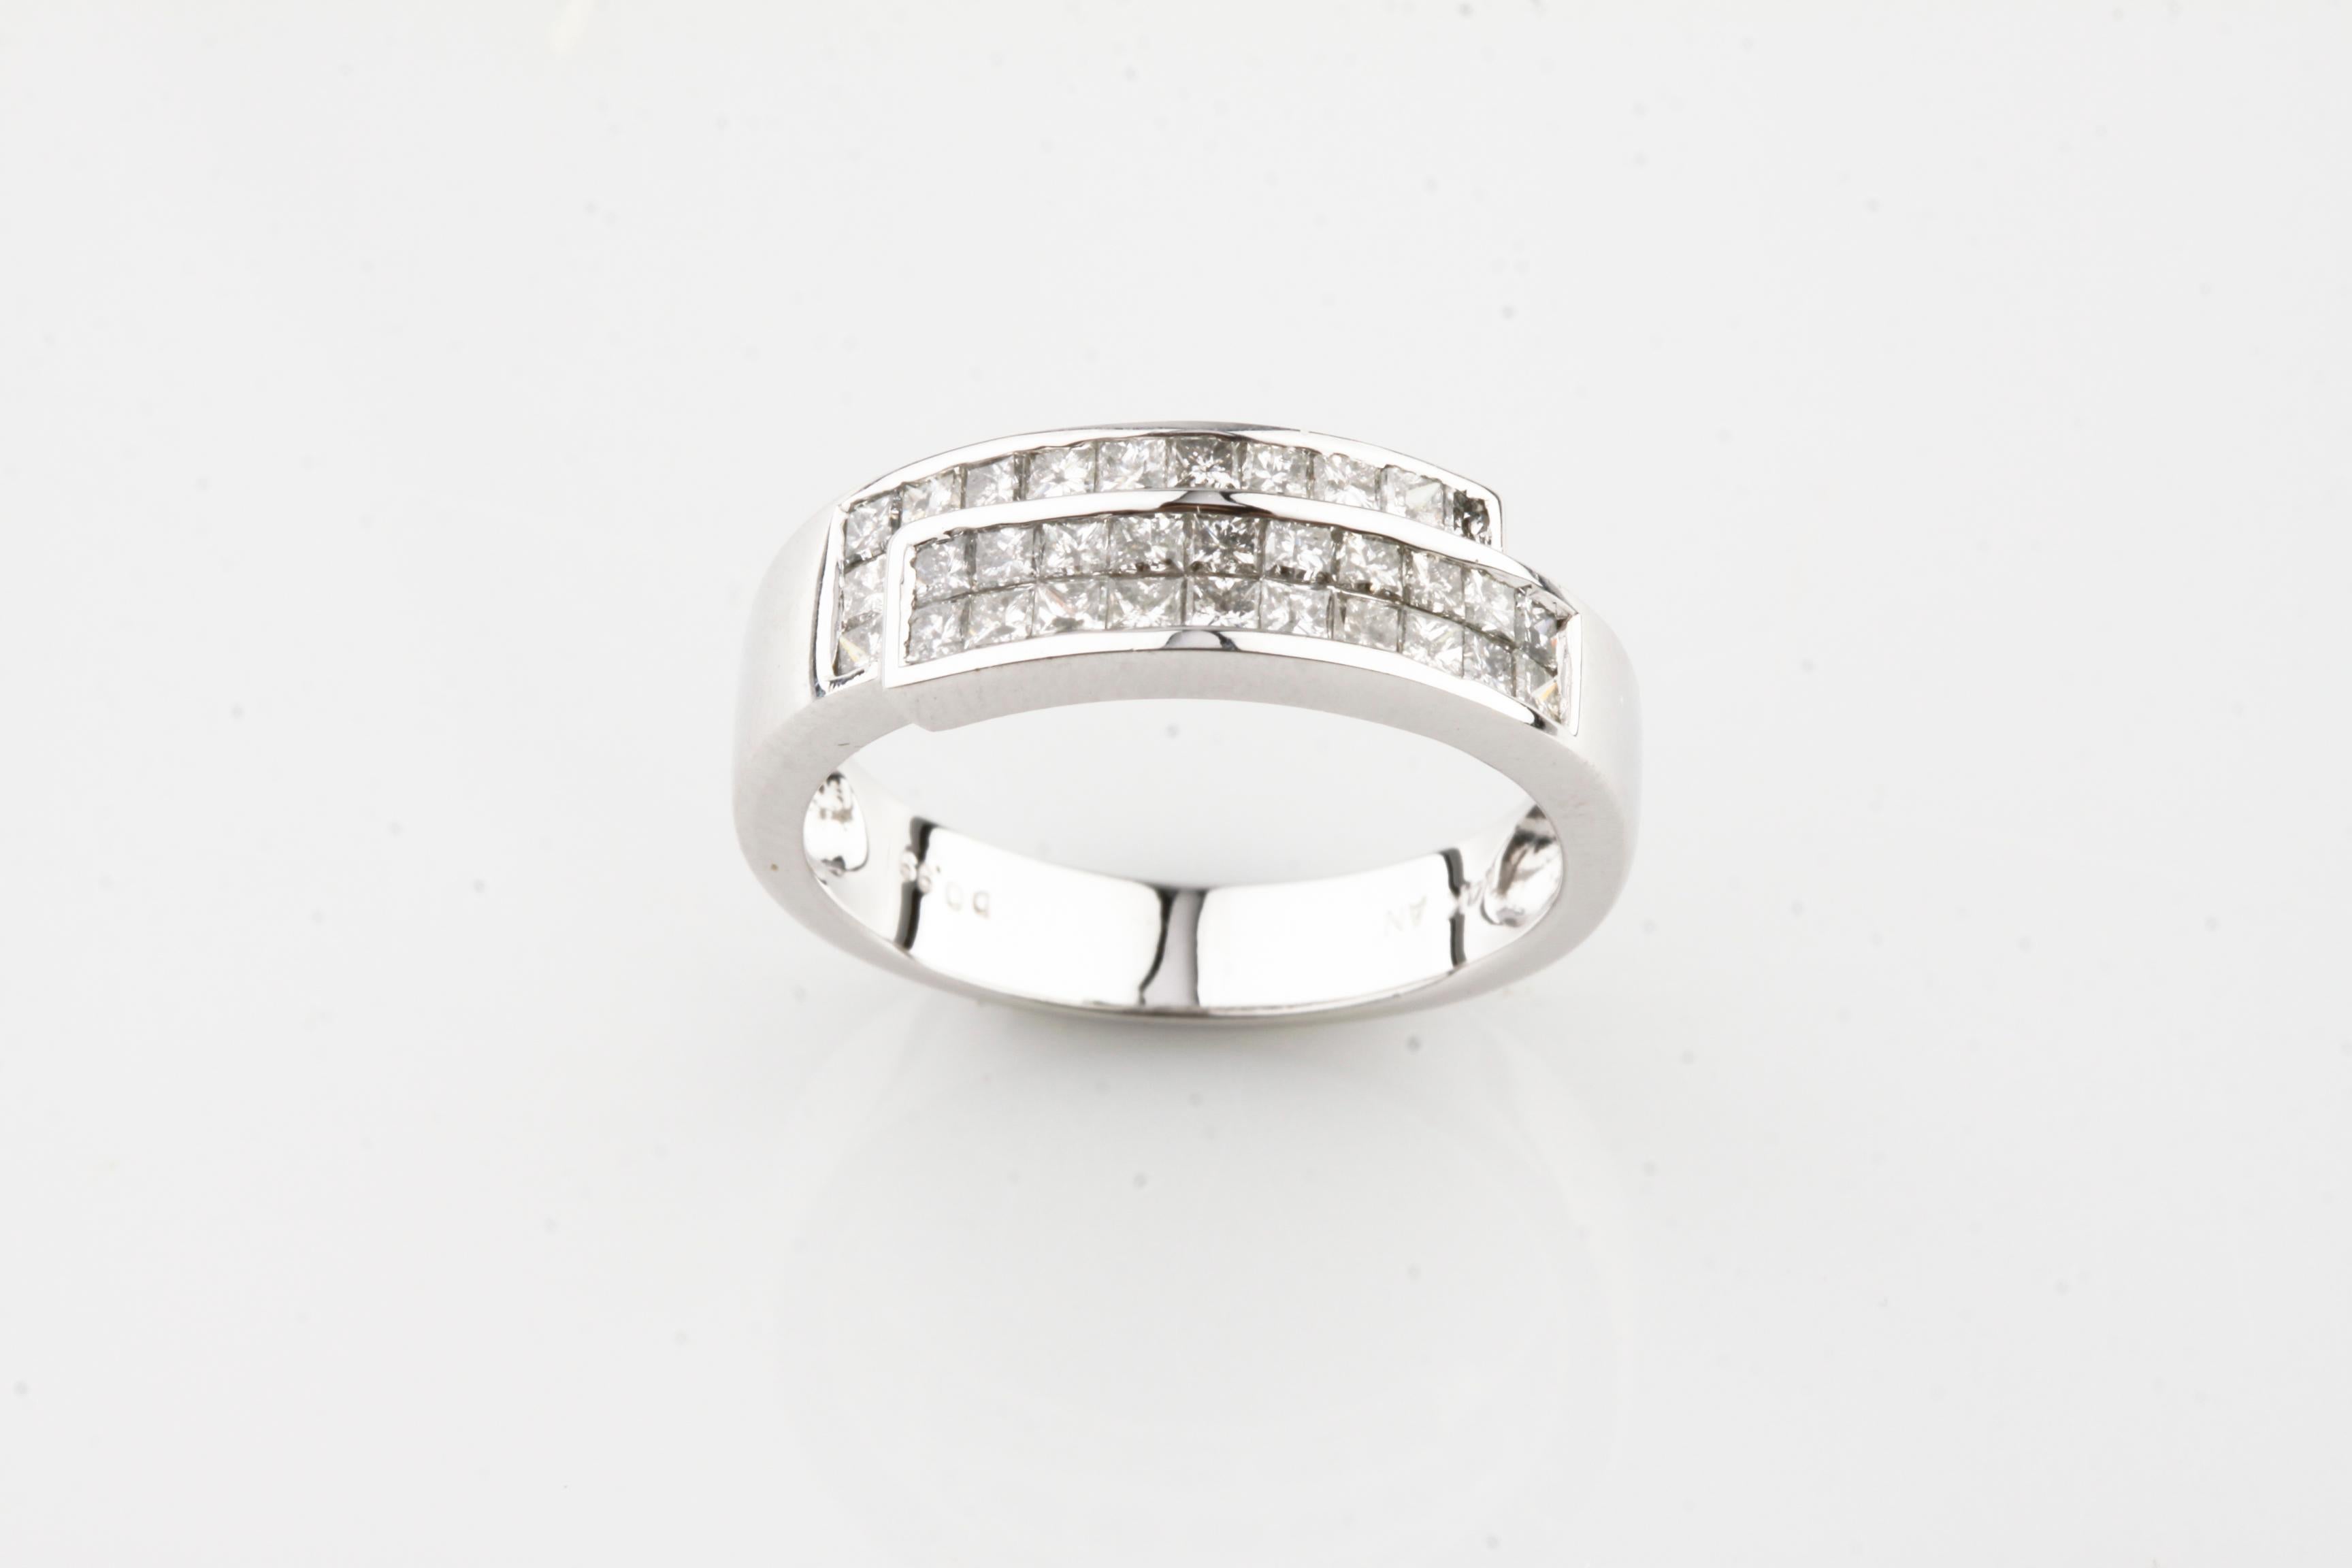 Gorgeous Princess Diamond Plaque Ring
Features Princess Cut Invisible Set Diamond in Terraced Plaques
Total Diamond Weight = Appx 0.99 ct
Size 7.25
Total Mass = 4.0 grams
Gorgeous Gift!